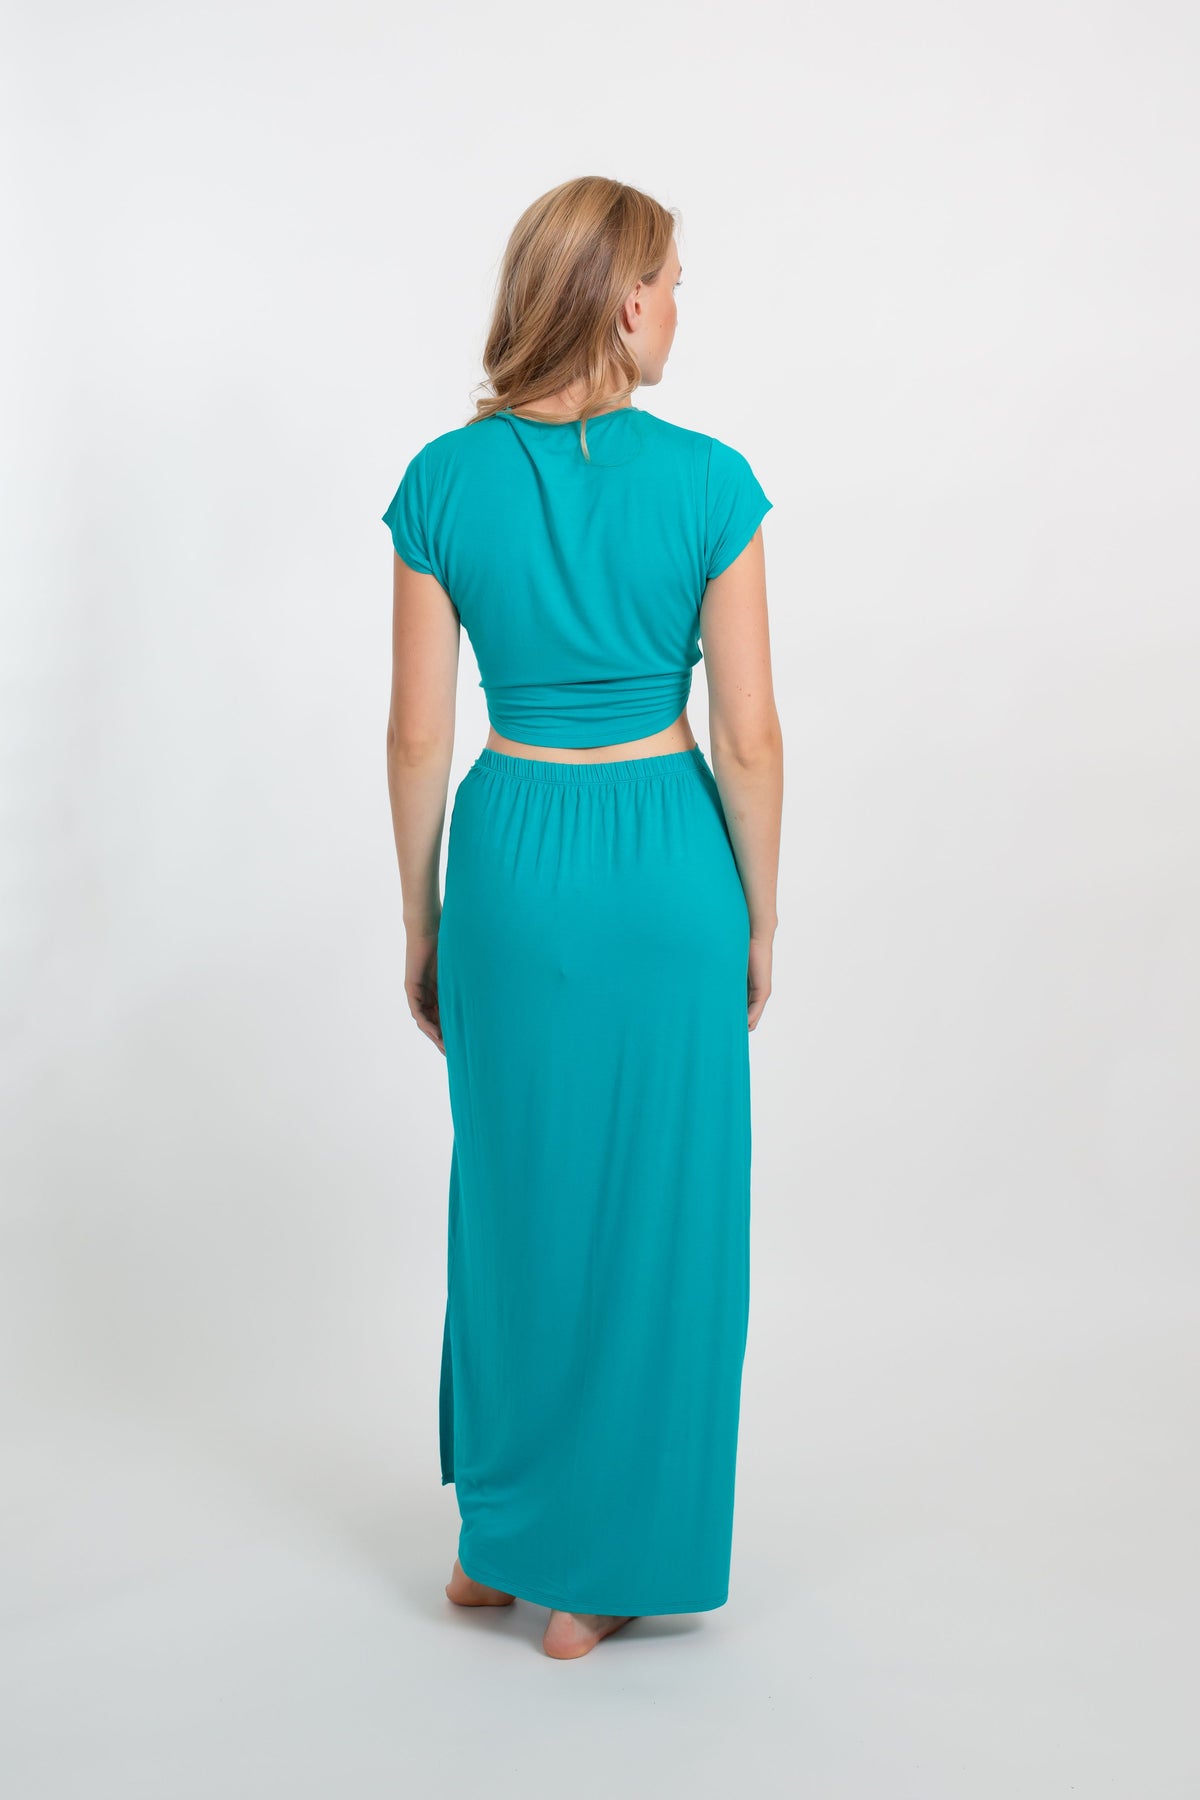 the back of a blonde hair woman model wearing matching crop top and maxi skirt in the color auqamarine fro Koy Resort